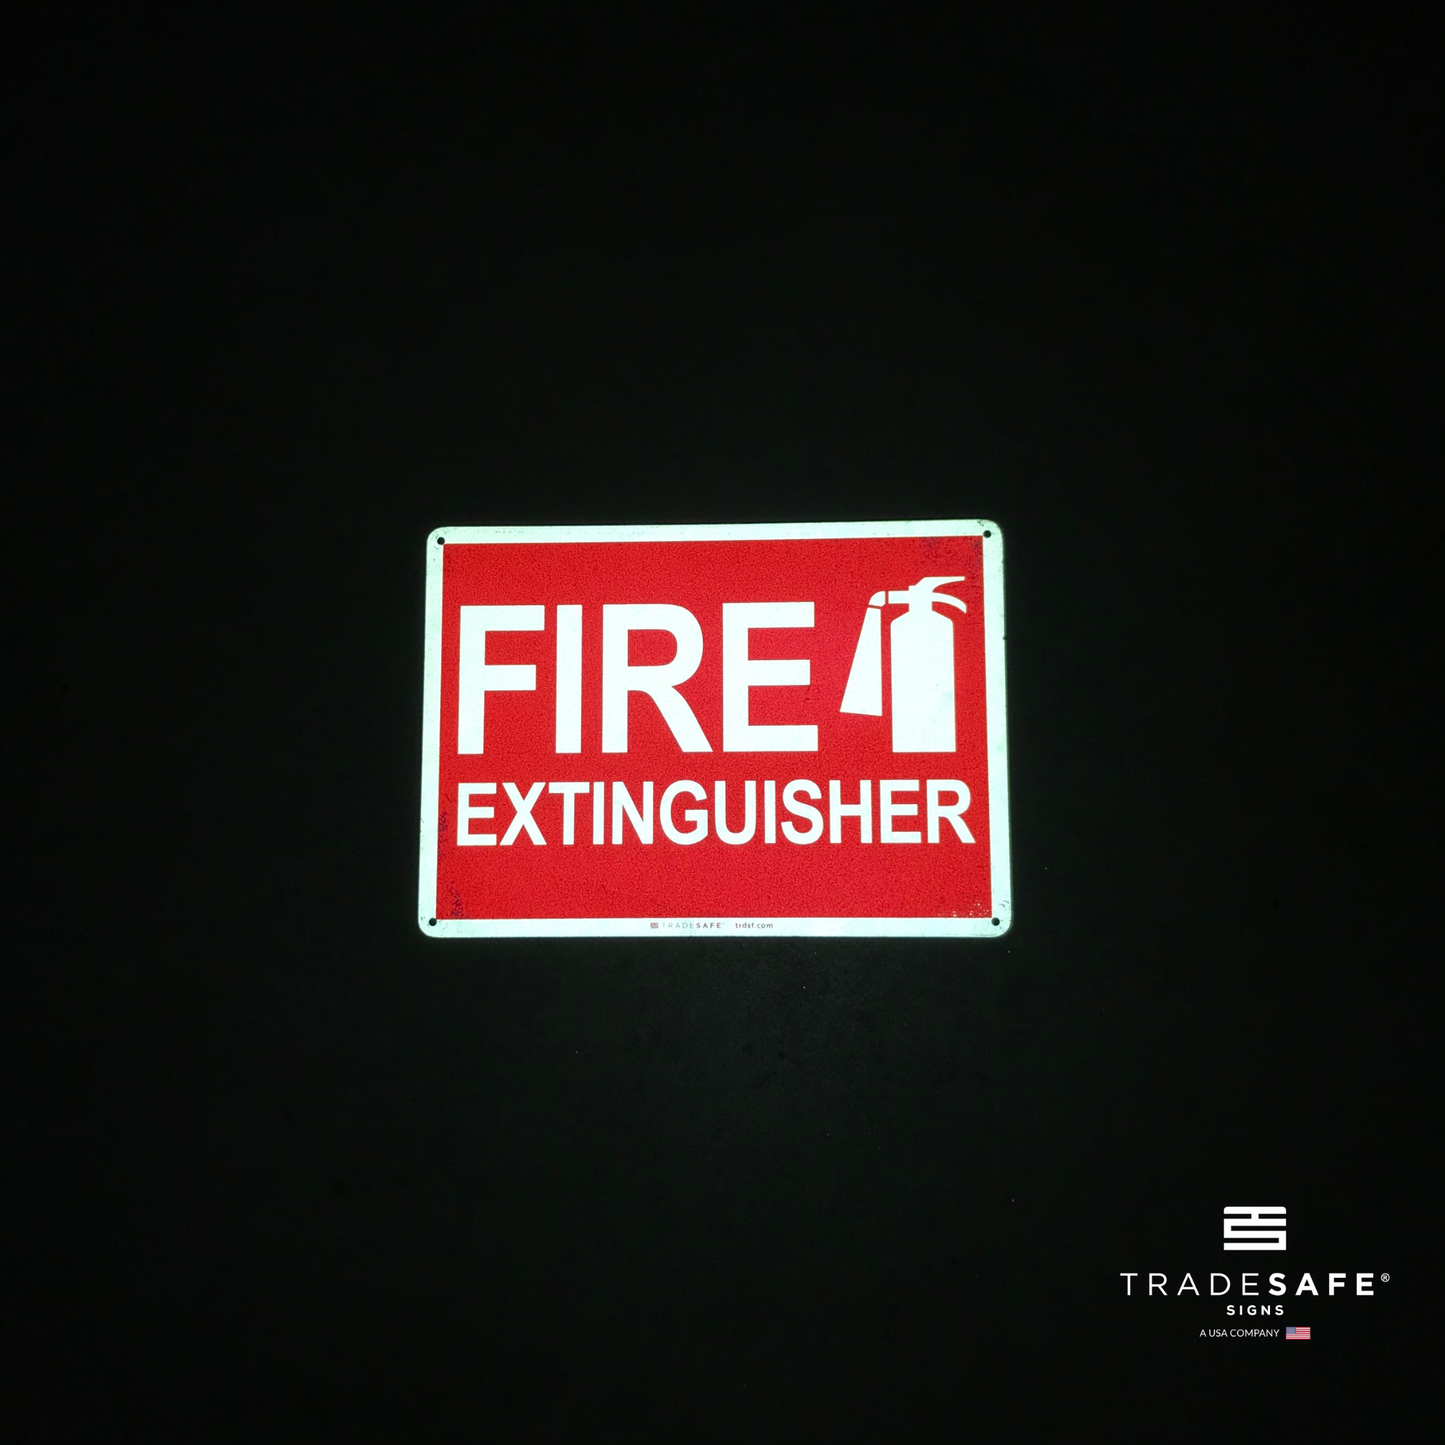 reflective attribute of fire extinguisher sign on black background